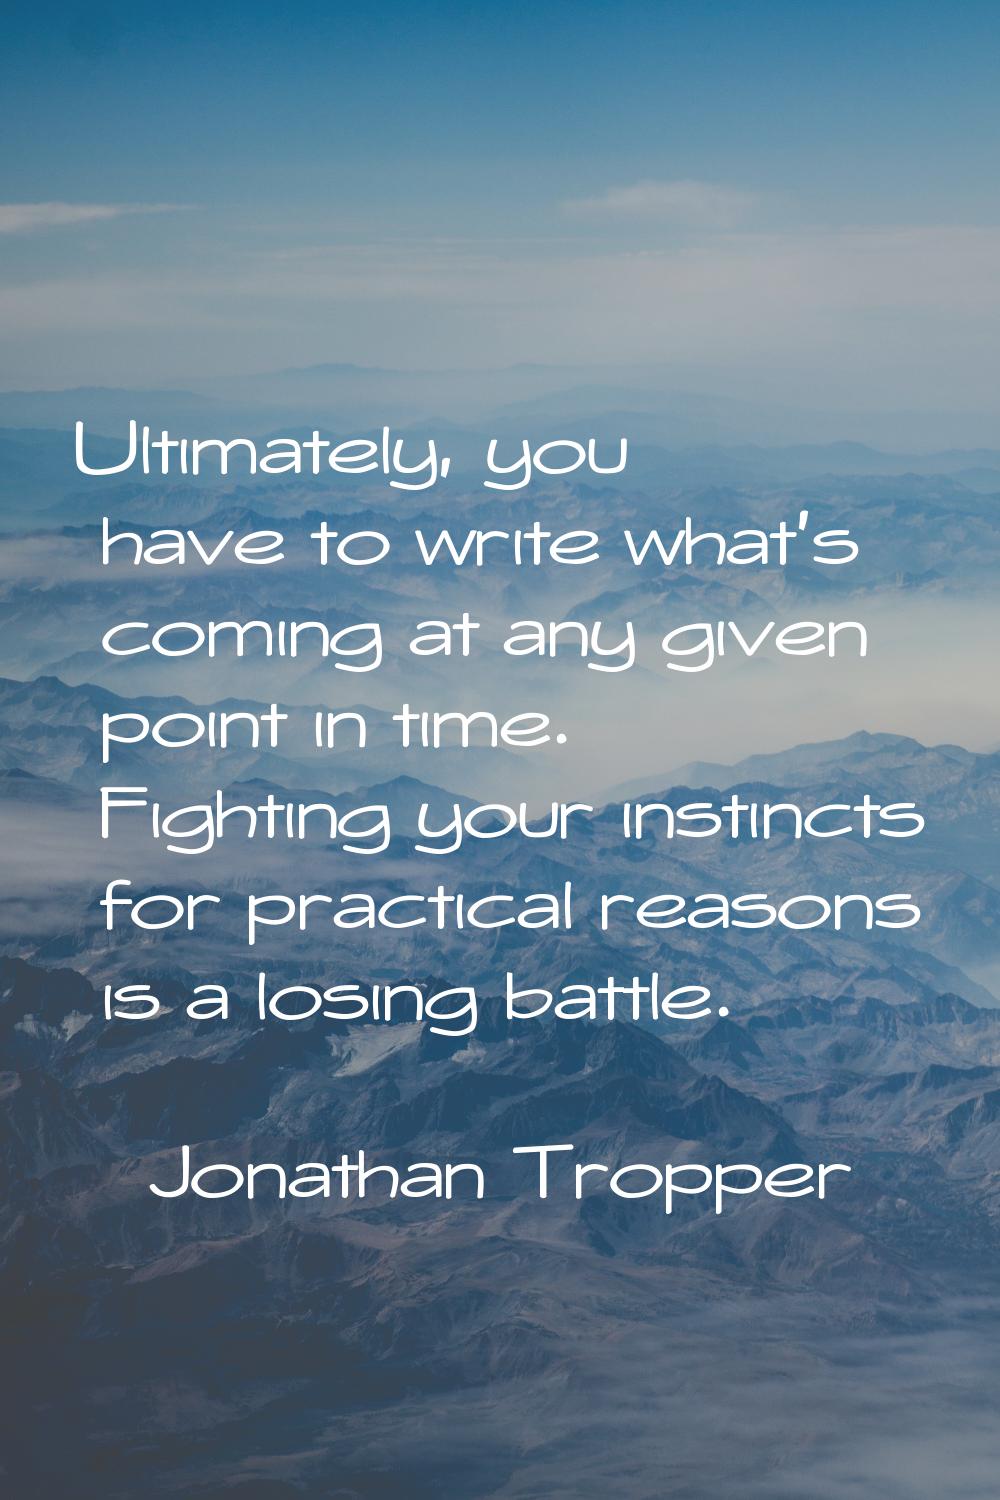 Ultimately, you have to write what's coming at any given point in time. Fighting your instincts for